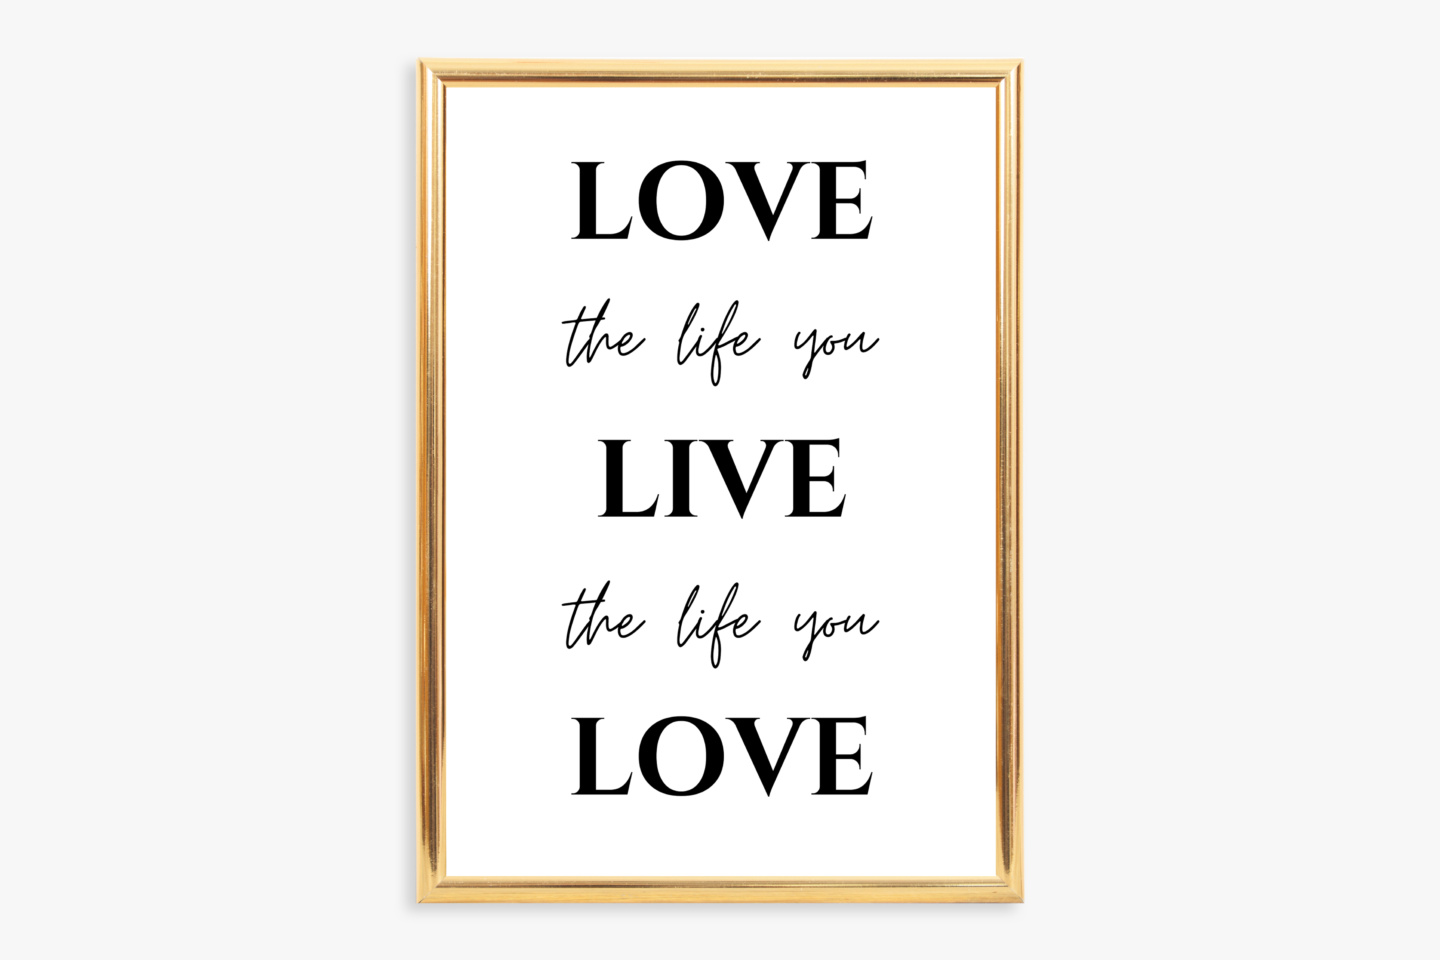 Printable Inspirational Quote Wall Art: Love The Life You Live / Live The Life You Love